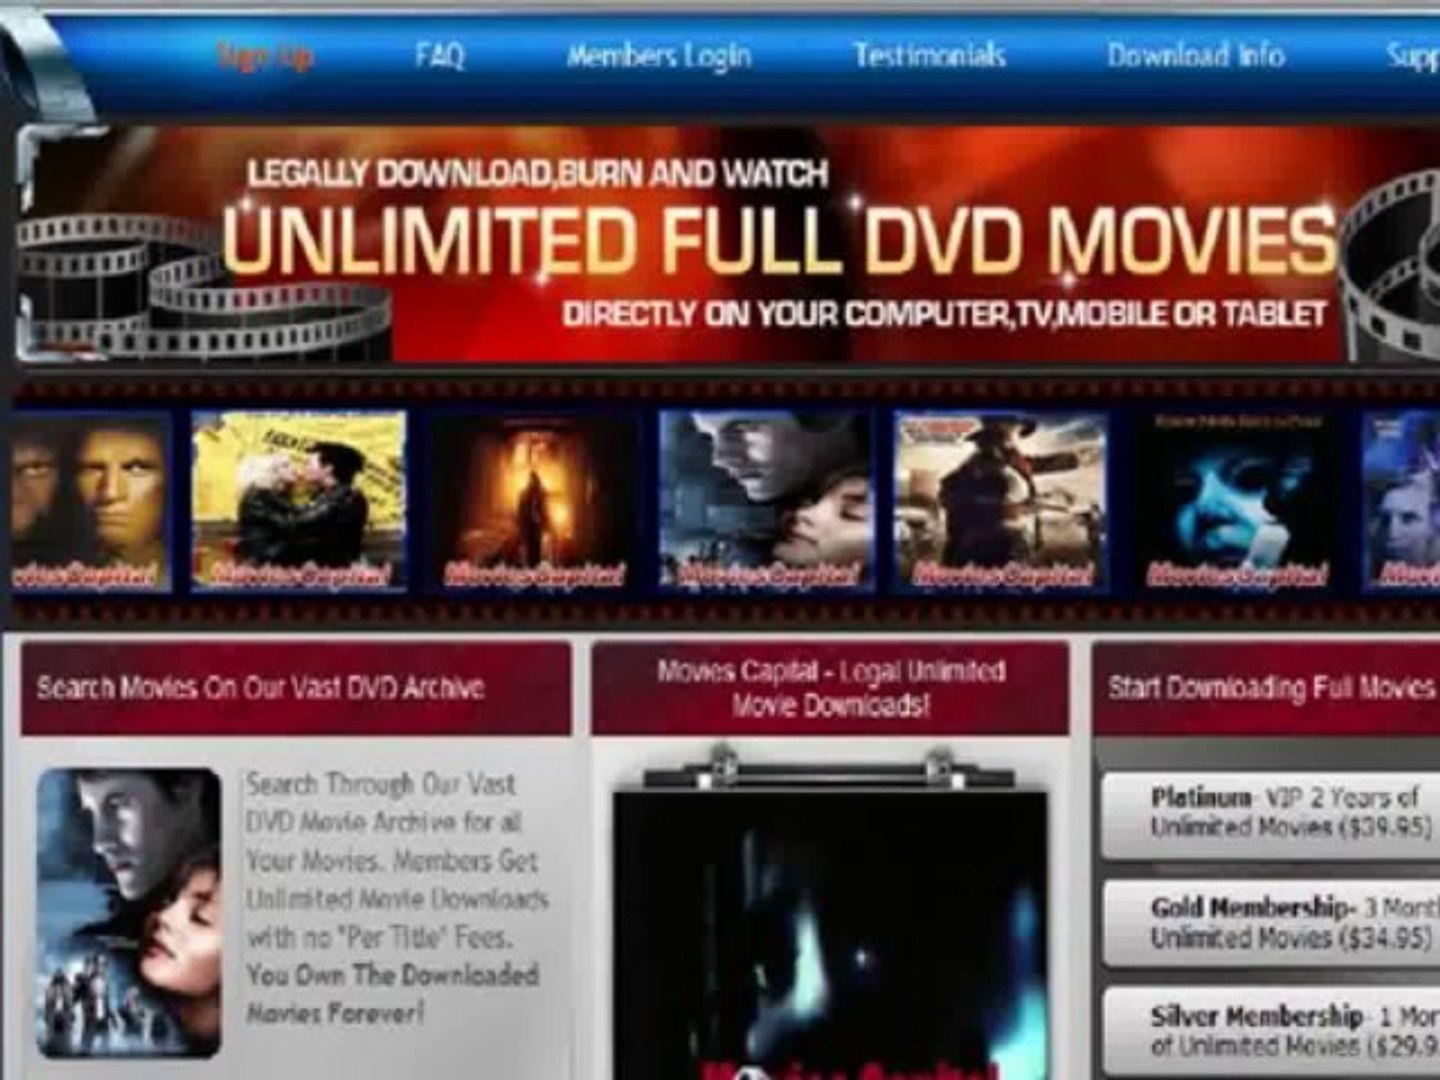 MoviesCapital - Movies Capital List Of Movies